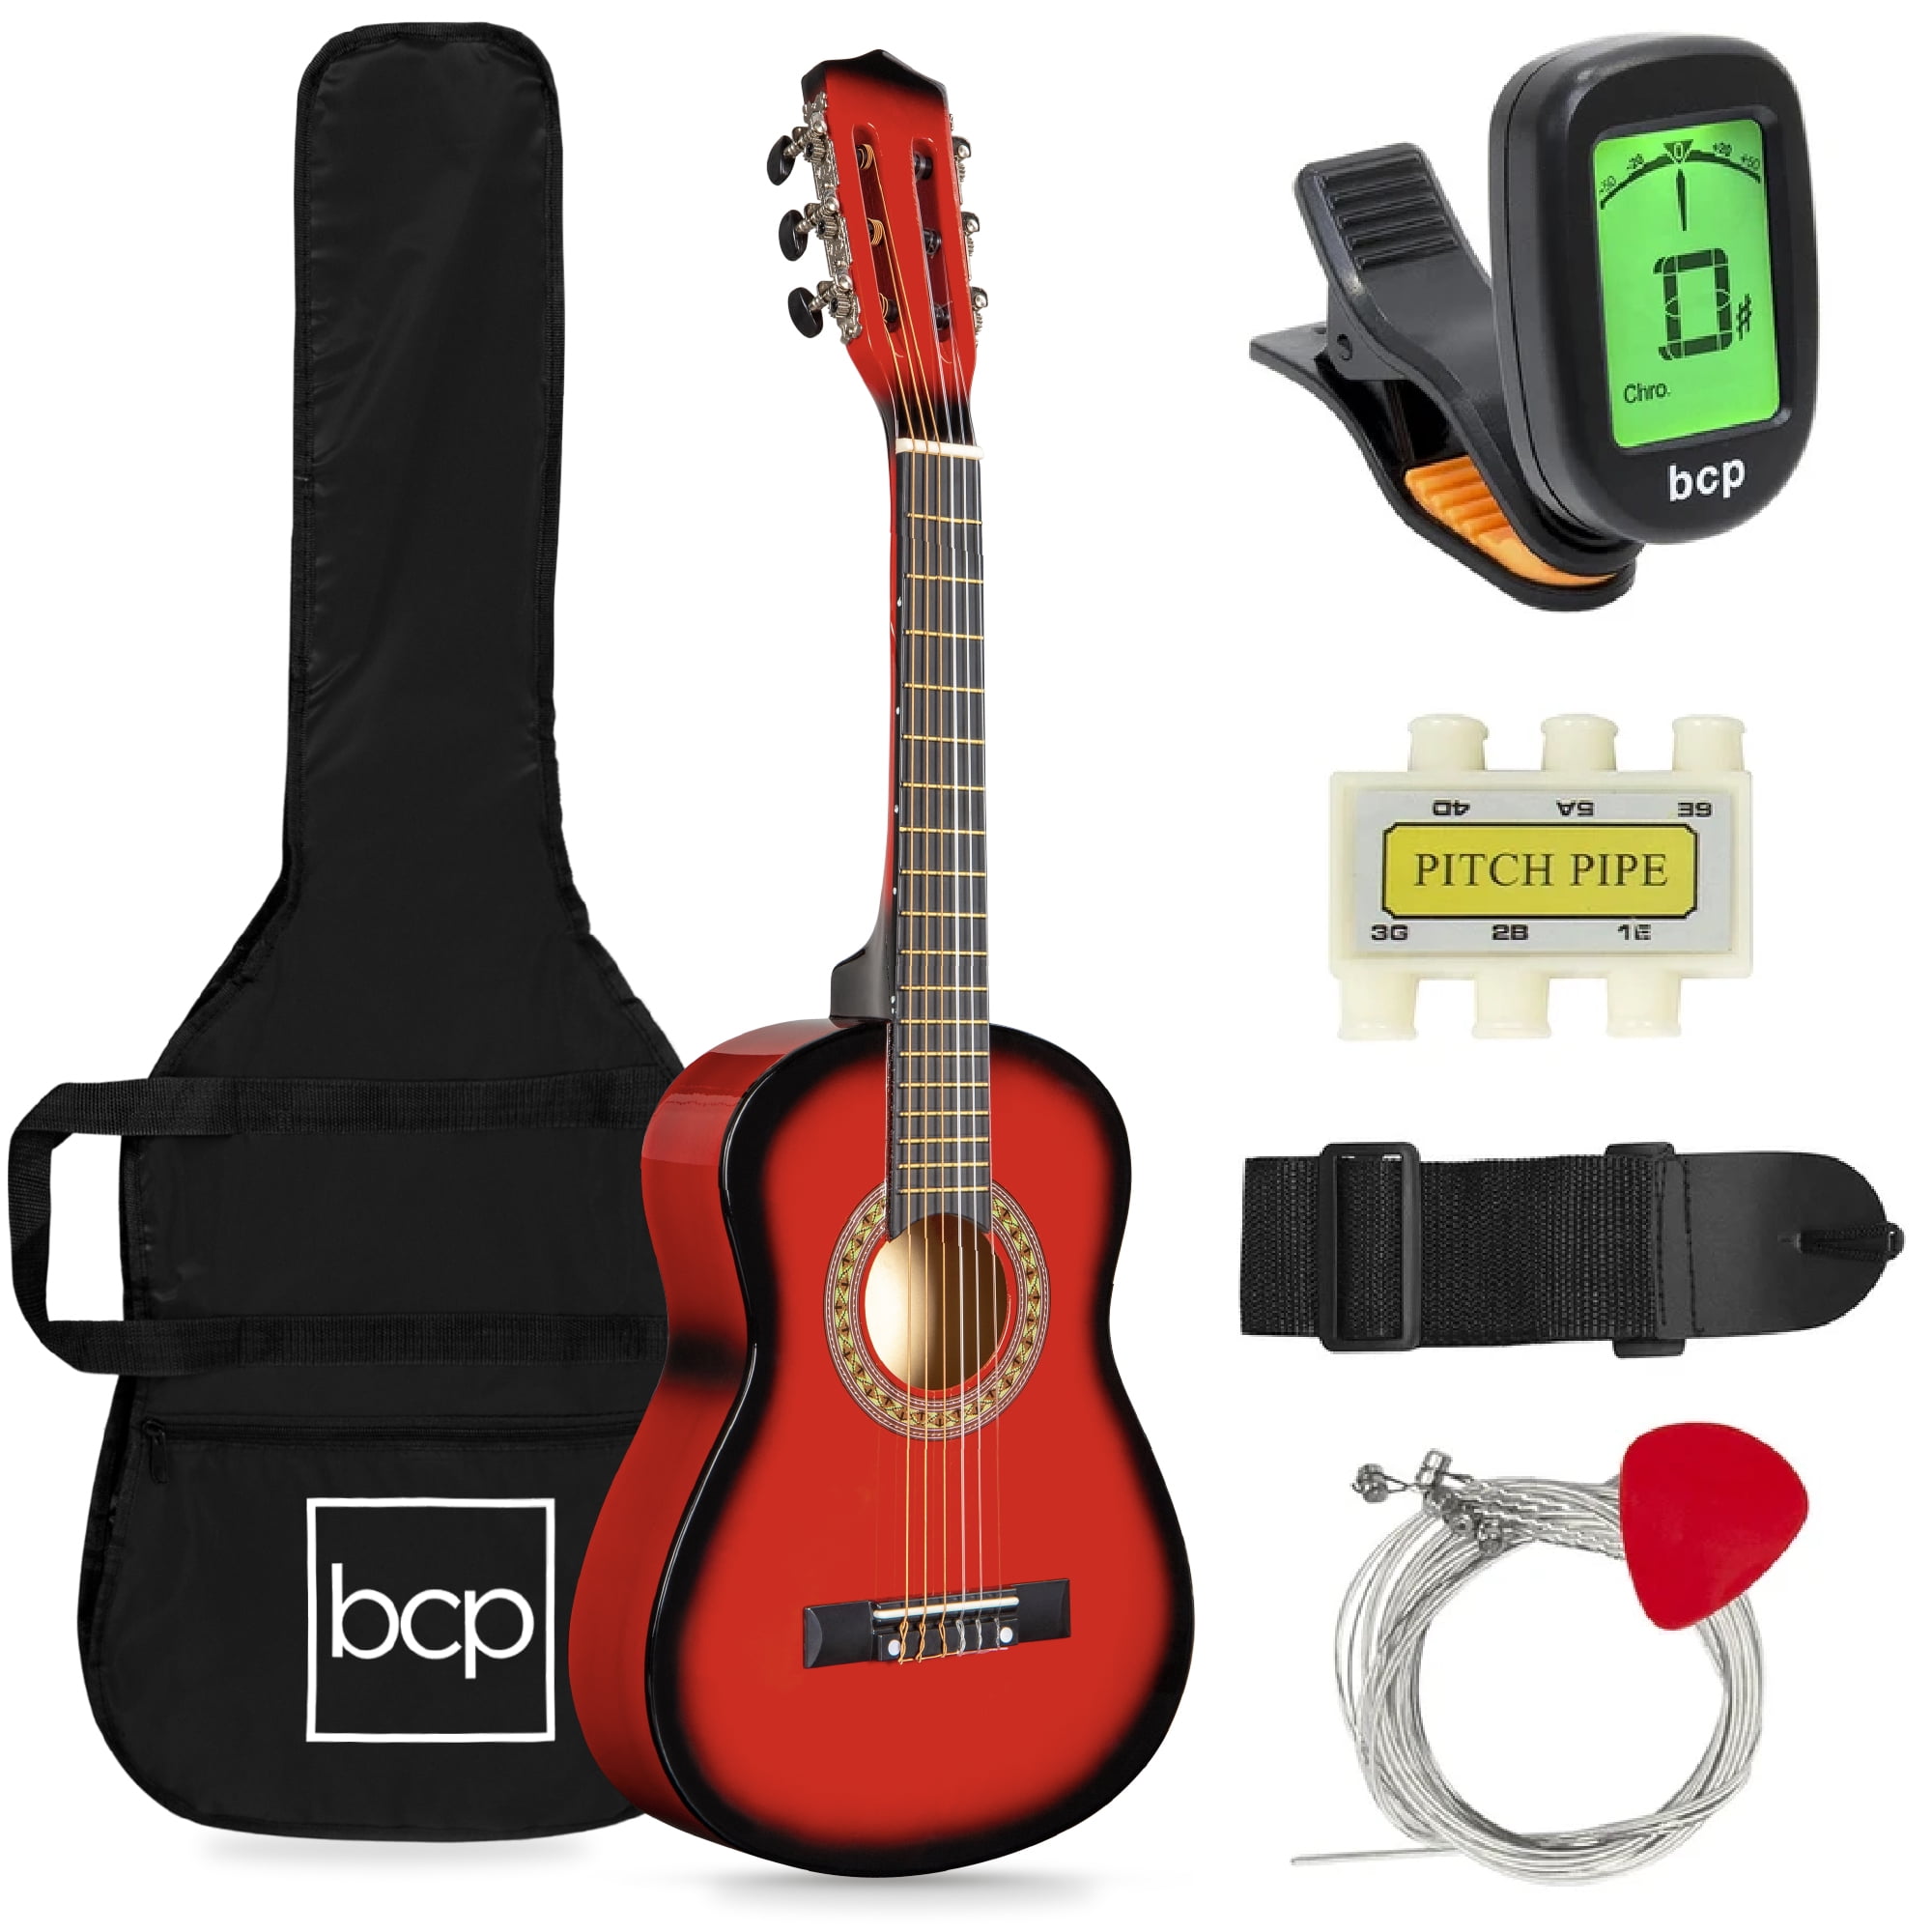 New Pink Acoustic Guitar W/ Accessories Combo Kit Beginners アコースティックギター アコギ  ギター ギター